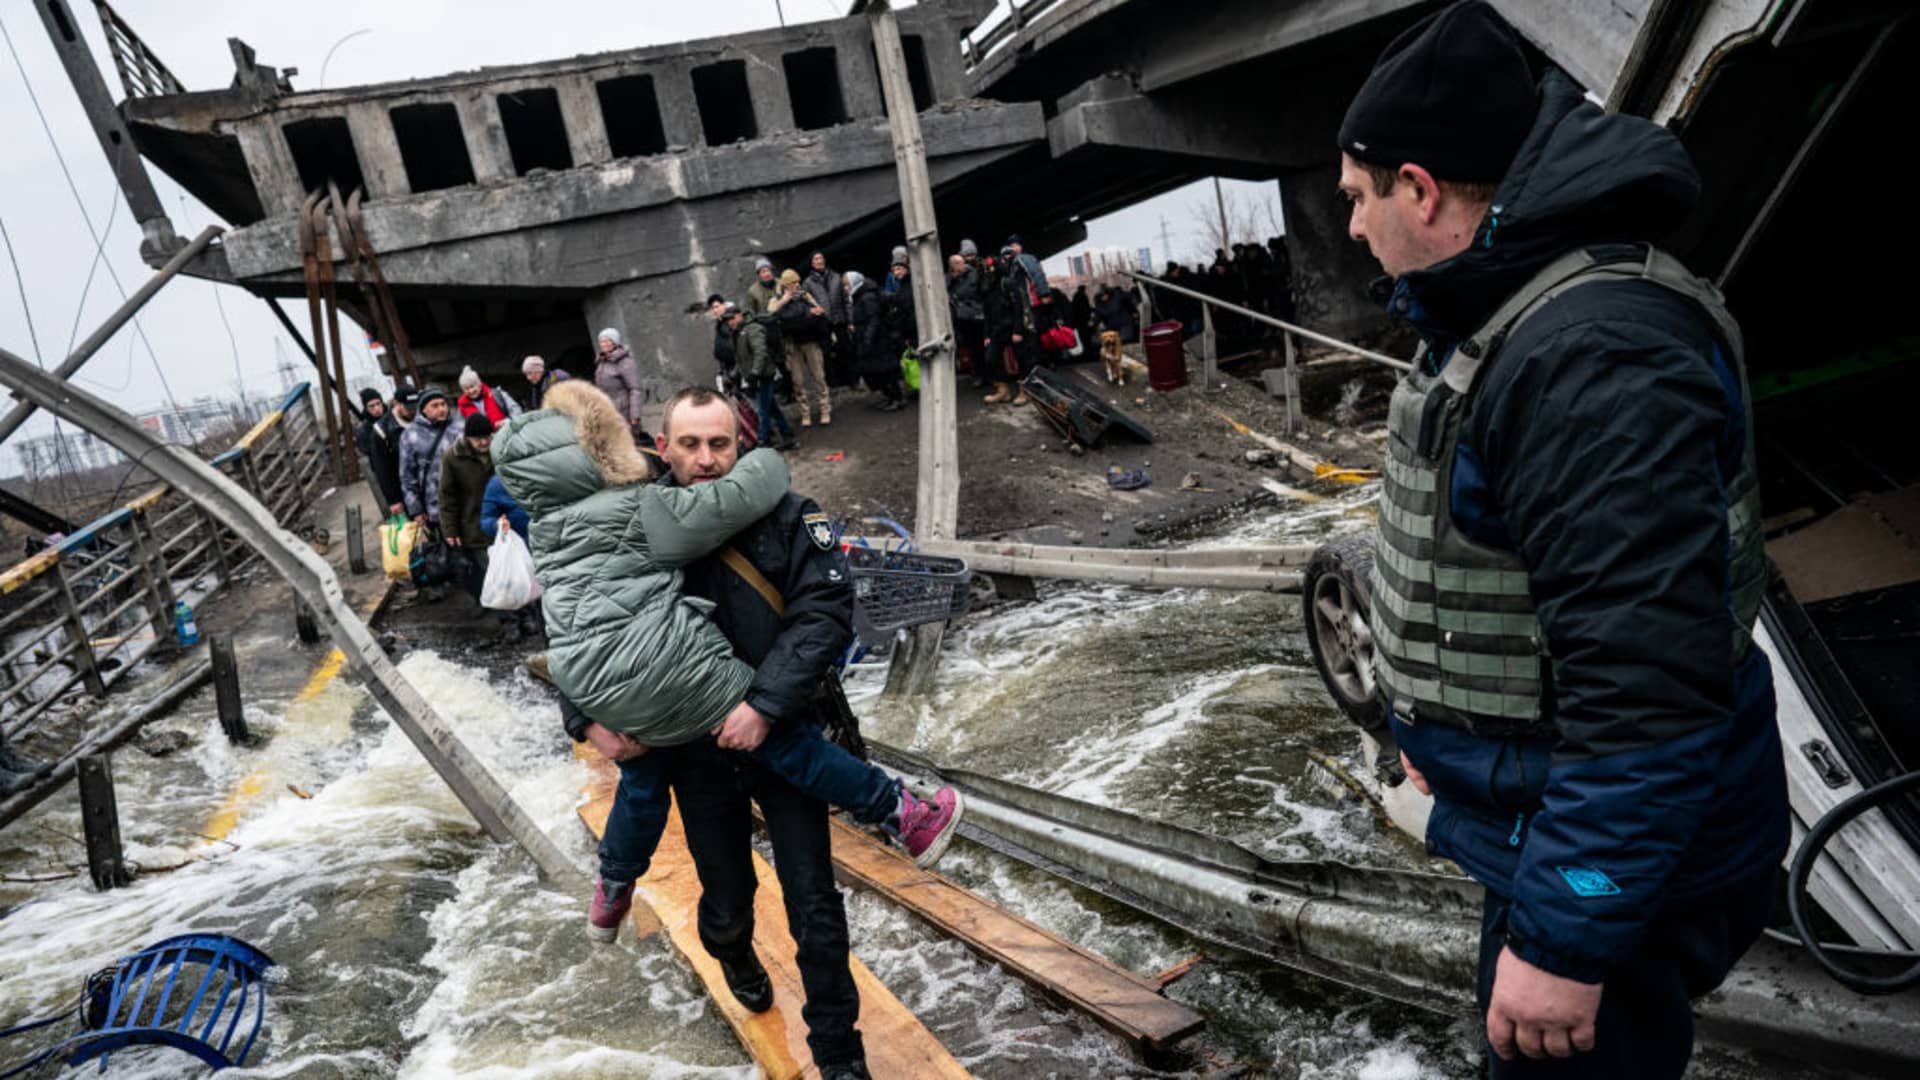 Civilians continue to flee from Irpin due to ongoing Russian attacks in Irpin, Ukraine on March 07, 2022.